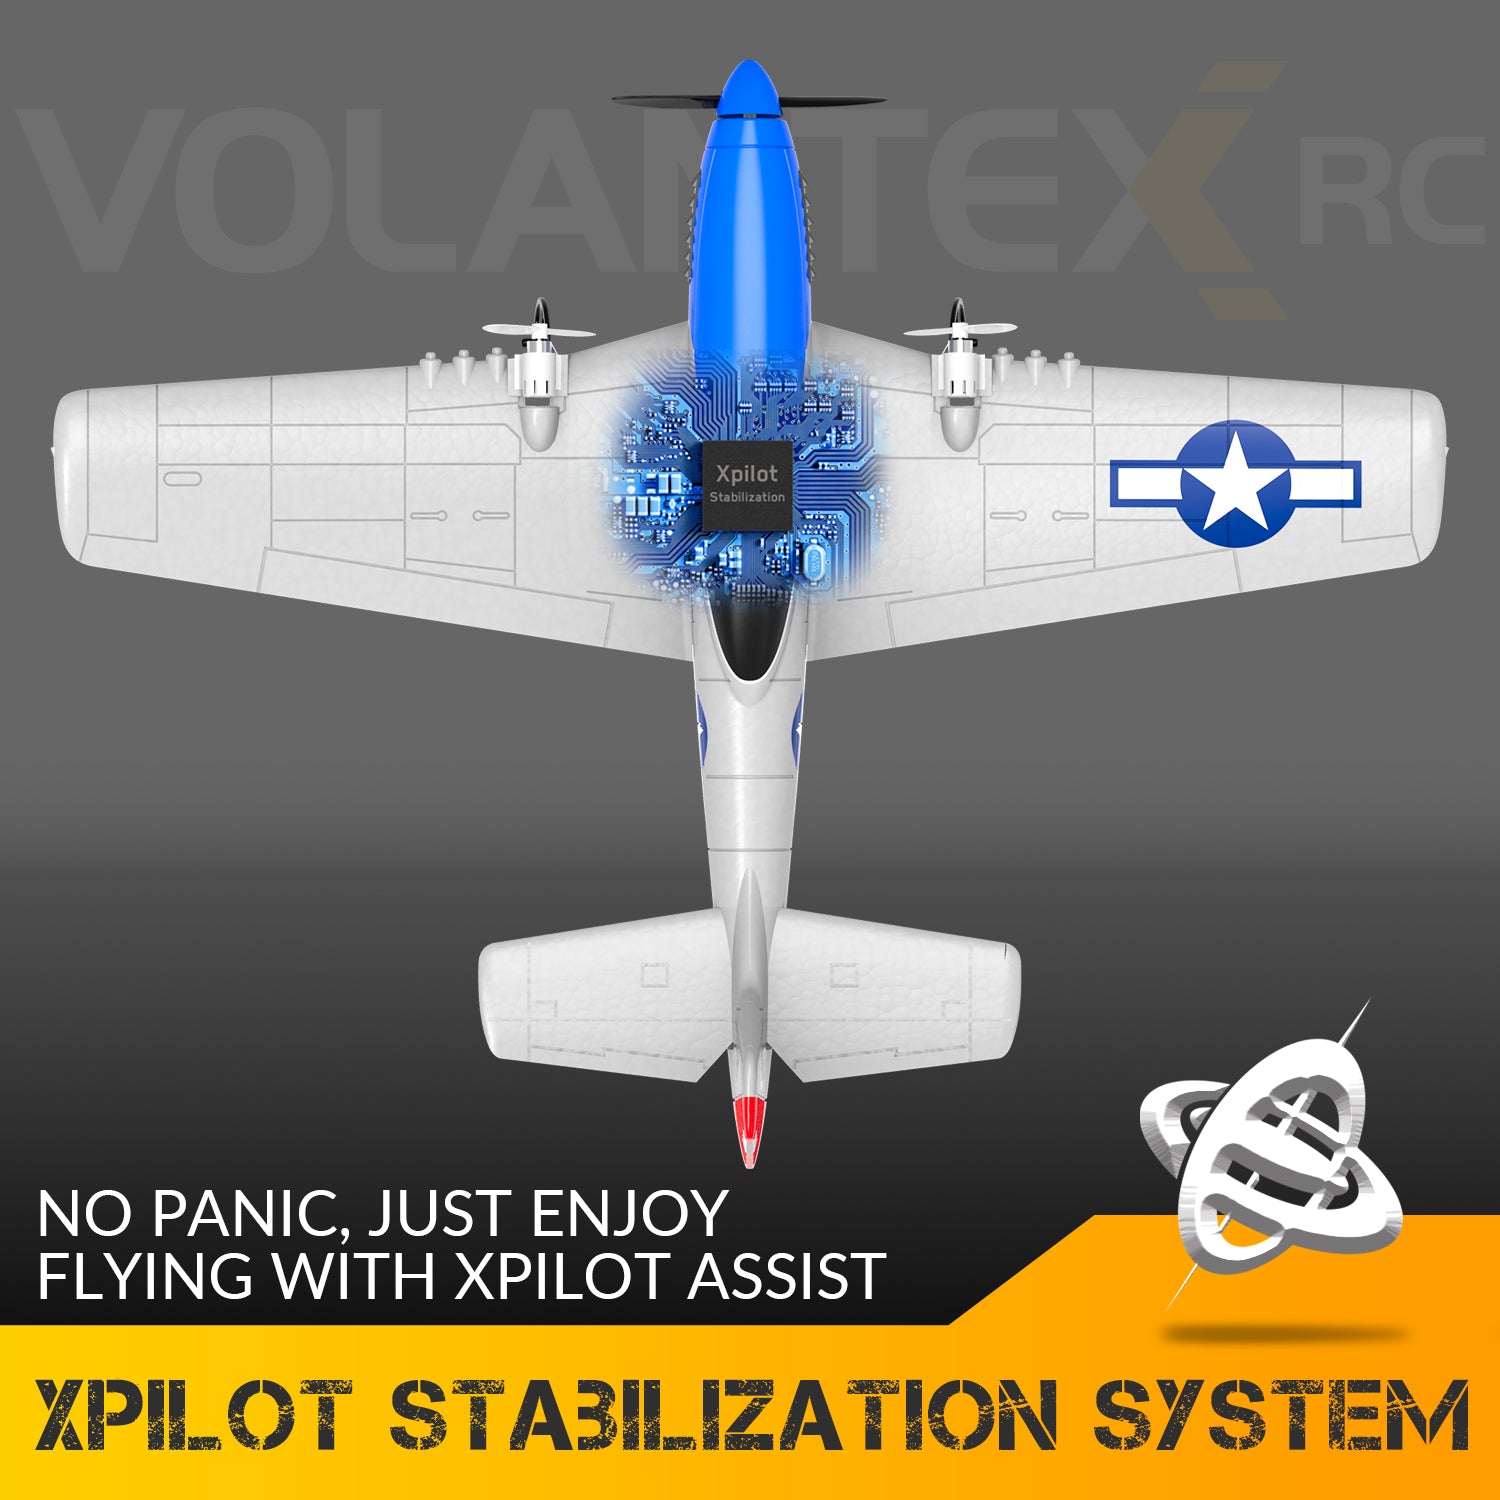 VOLANTEXRC P51D Mustang 2 Channels RC Beginner Airplane with Gyro Stabilizer Easy Fly